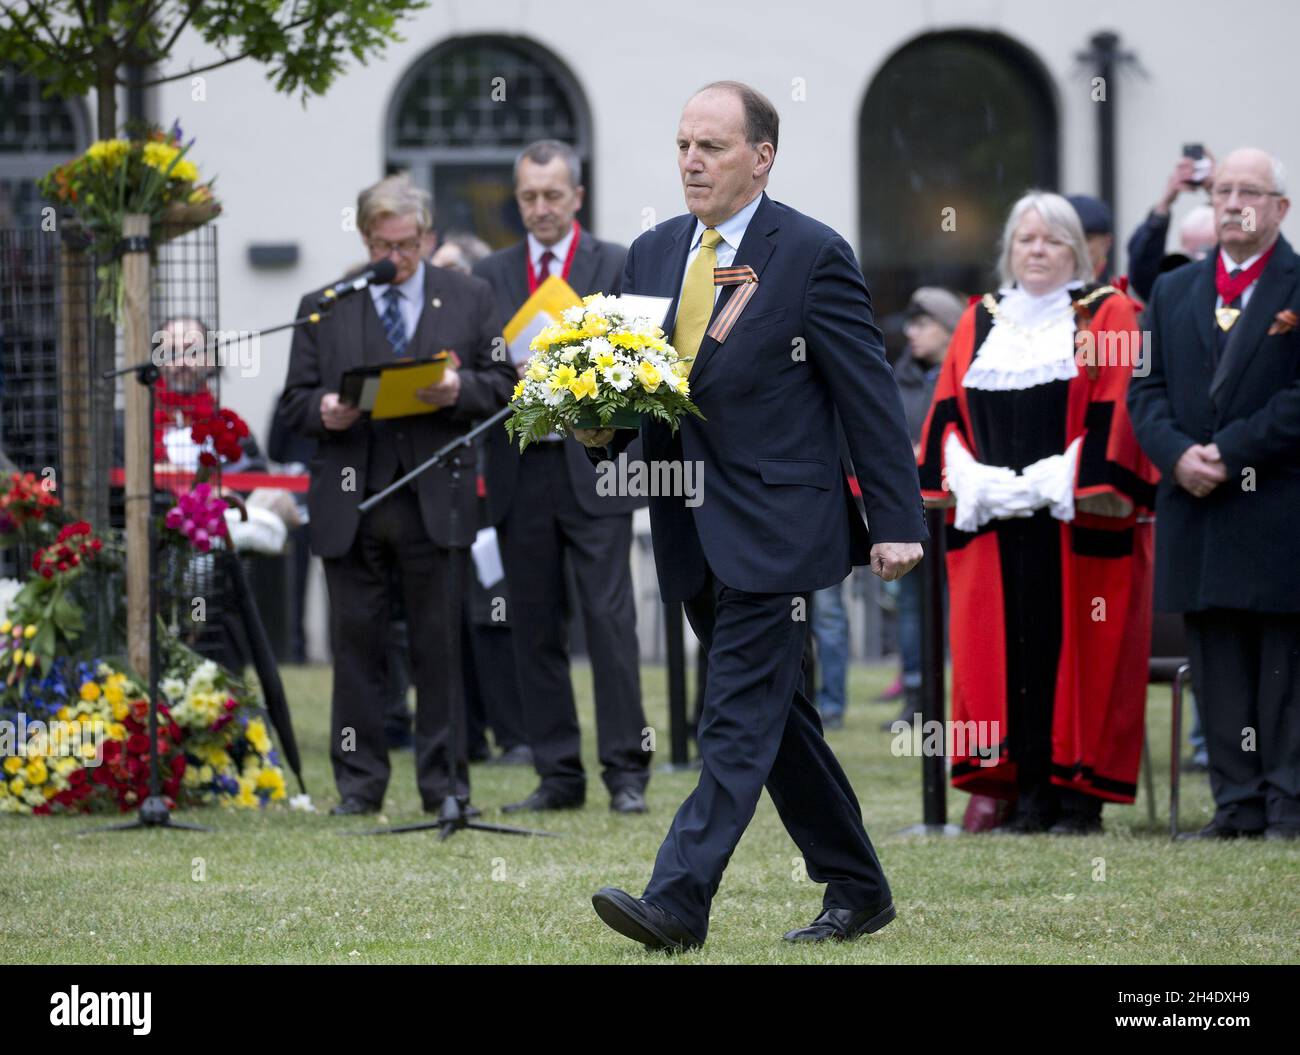 Former Liberal Democrat MP Simon Hughes carries flowers to the Soviet War Memorial during Victory Day celebrations  in London, to mark the 72nd anniversary of the victory of the Soviet Army and its Allies over Nazi Germany in World War II. Photo credit should read: Isabel Infantes / EMPICS Entertainment. Stock Photo